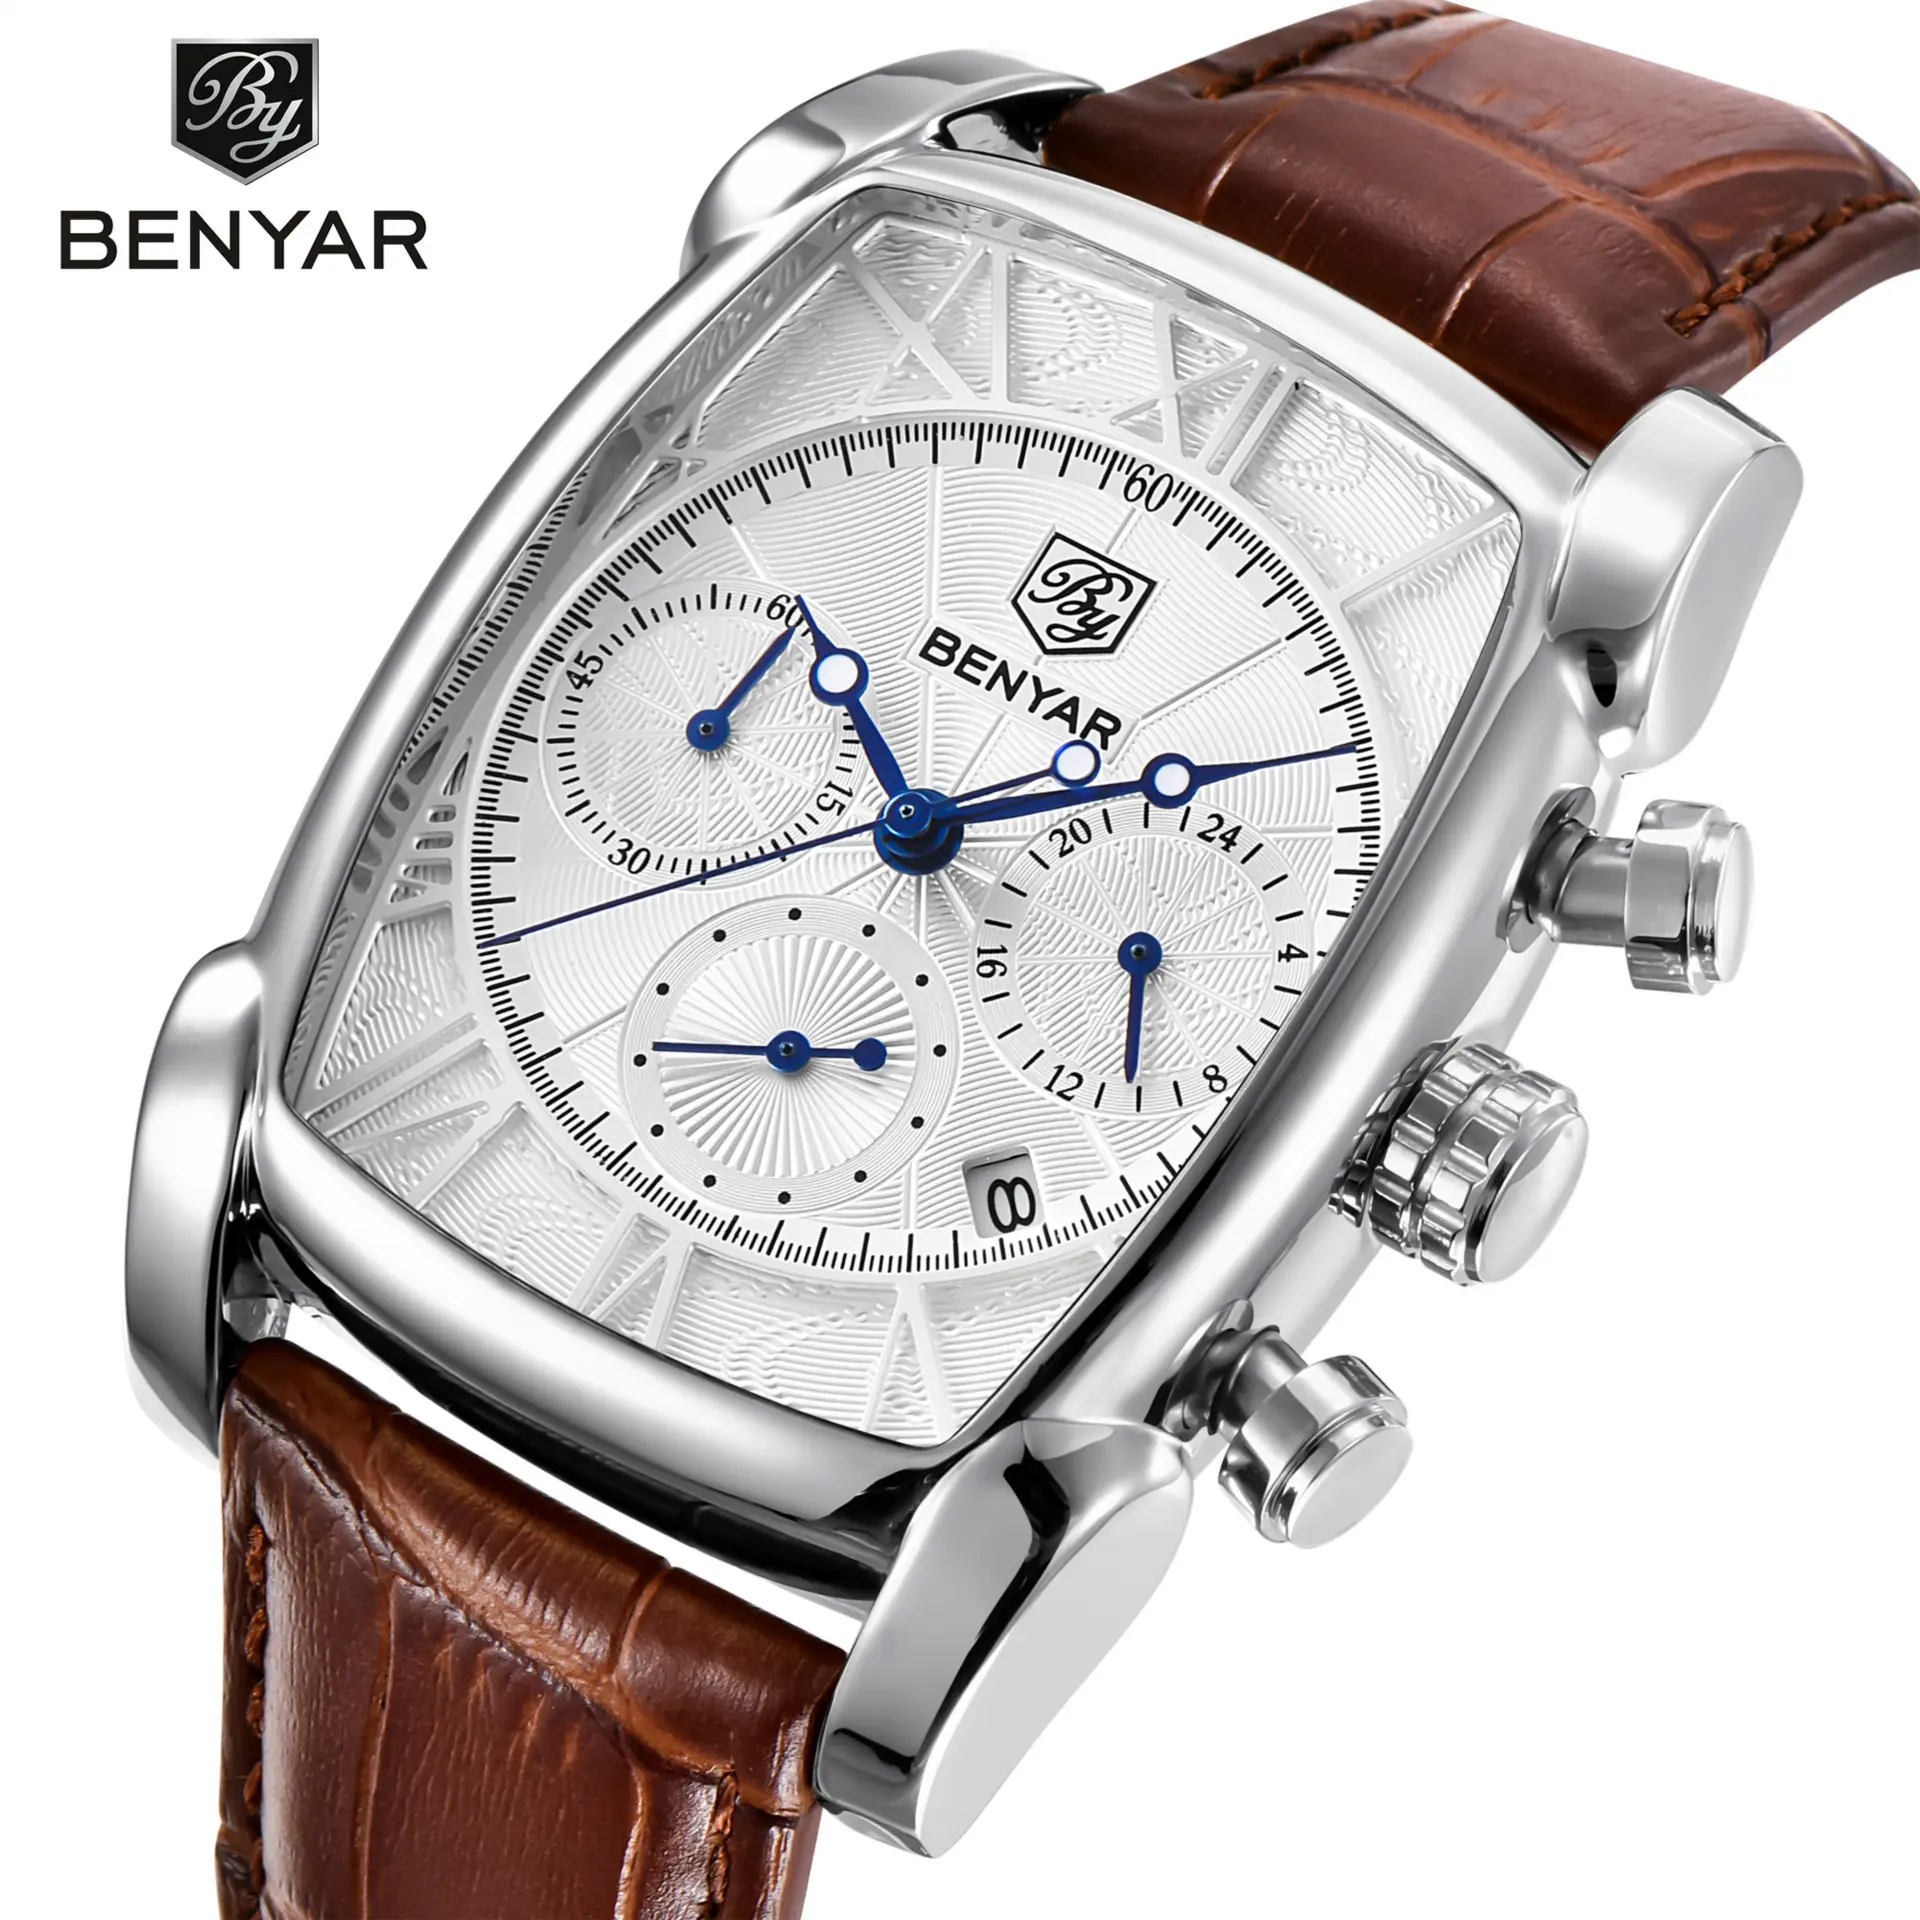 Best Seller Wristwatch Benyar 5113 Square Case Watches With Quartz Movement Analog Date Timepiece Ready To Ship